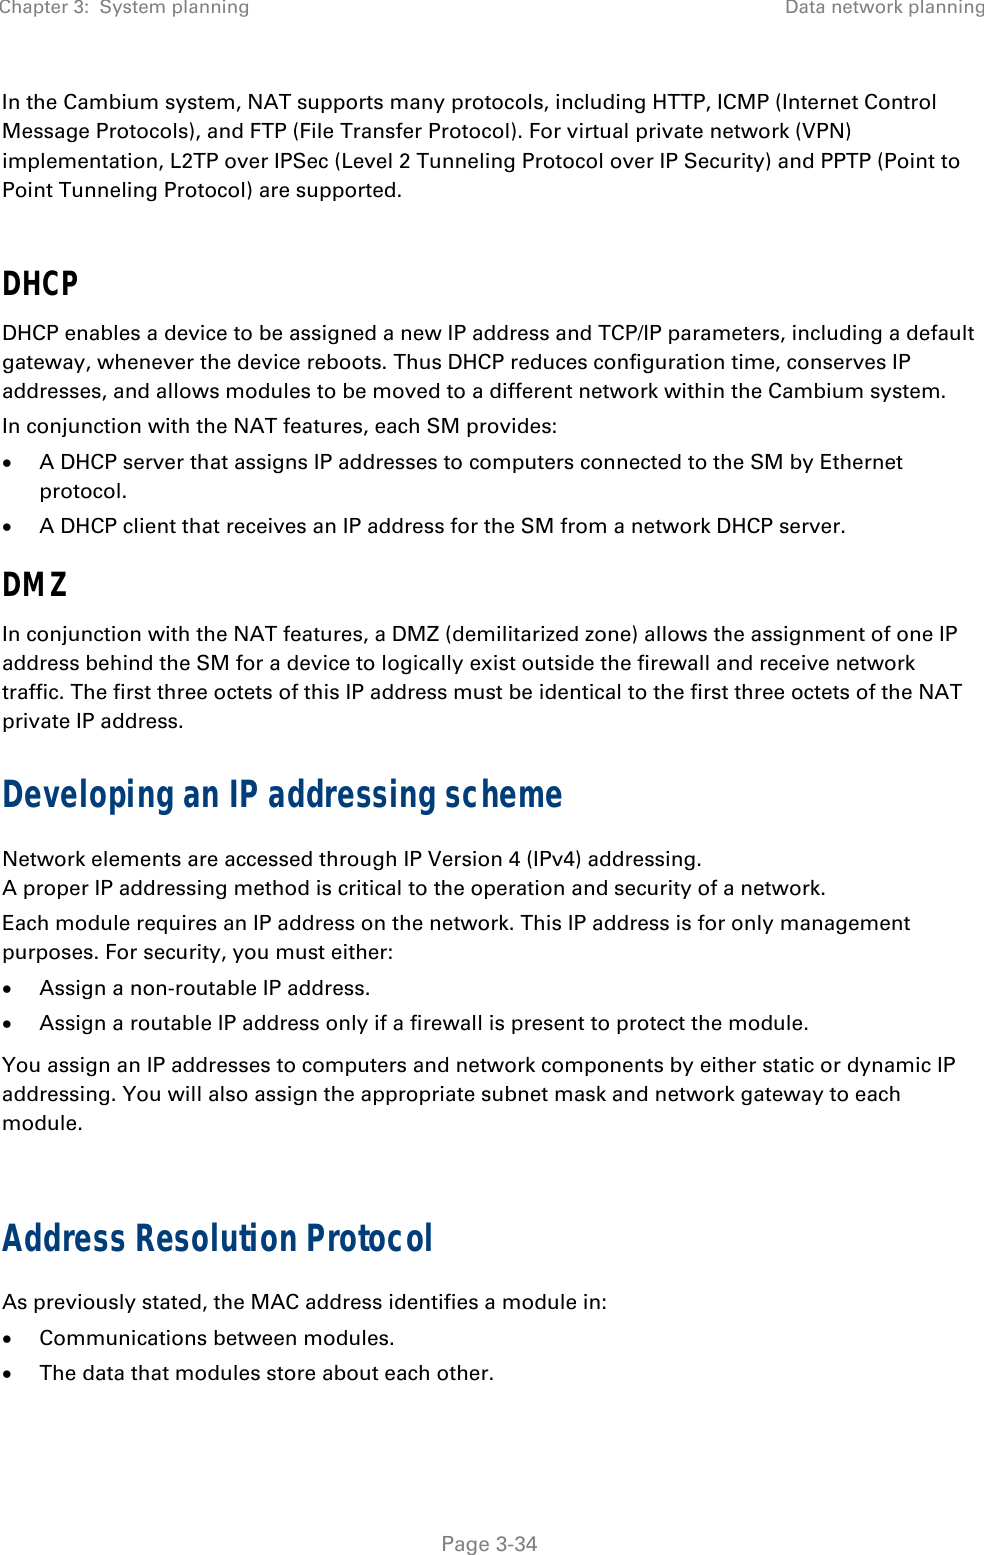 Chapter 3:  System planning  Data network planning   Page 3-34 In the Cambium system, NAT supports many protocols, including HTTP, ICMP (Internet Control Message Protocols), and FTP (File Transfer Protocol). For virtual private network (VPN) implementation, L2TP over IPSec (Level 2 Tunneling Protocol over IP Security) and PPTP (Point to Point Tunneling Protocol) are supported.   DHCP DHCP enables a device to be assigned a new IP address and TCP/IP parameters, including a default gateway, whenever the device reboots. Thus DHCP reduces configuration time, conserves IP addresses, and allows modules to be moved to a different network within the Cambium system. In conjunction with the NAT features, each SM provides:  A DHCP server that assigns IP addresses to computers connected to the SM by Ethernet protocol.  A DHCP client that receives an IP address for the SM from a network DHCP server. DMZ In conjunction with the NAT features, a DMZ (demilitarized zone) allows the assignment of one IP address behind the SM for a device to logically exist outside the firewall and receive network traffic. The first three octets of this IP address must be identical to the first three octets of the NAT private IP address. Developing an IP addressing scheme Network elements are accessed through IP Version 4 (IPv4) addressing.  A proper IP addressing method is critical to the operation and security of a network. Each module requires an IP address on the network. This IP address is for only management purposes. For security, you must either:  Assign a non-routable IP address.  Assign a routable IP address only if a firewall is present to protect the module.  You assign an IP addresses to computers and network components by either static or dynamic IP addressing. You will also assign the appropriate subnet mask and network gateway to each module.   Address Resolution Protocol As previously stated, the MAC address identifies a module in:  Communications between modules.  The data that modules store about each other. 